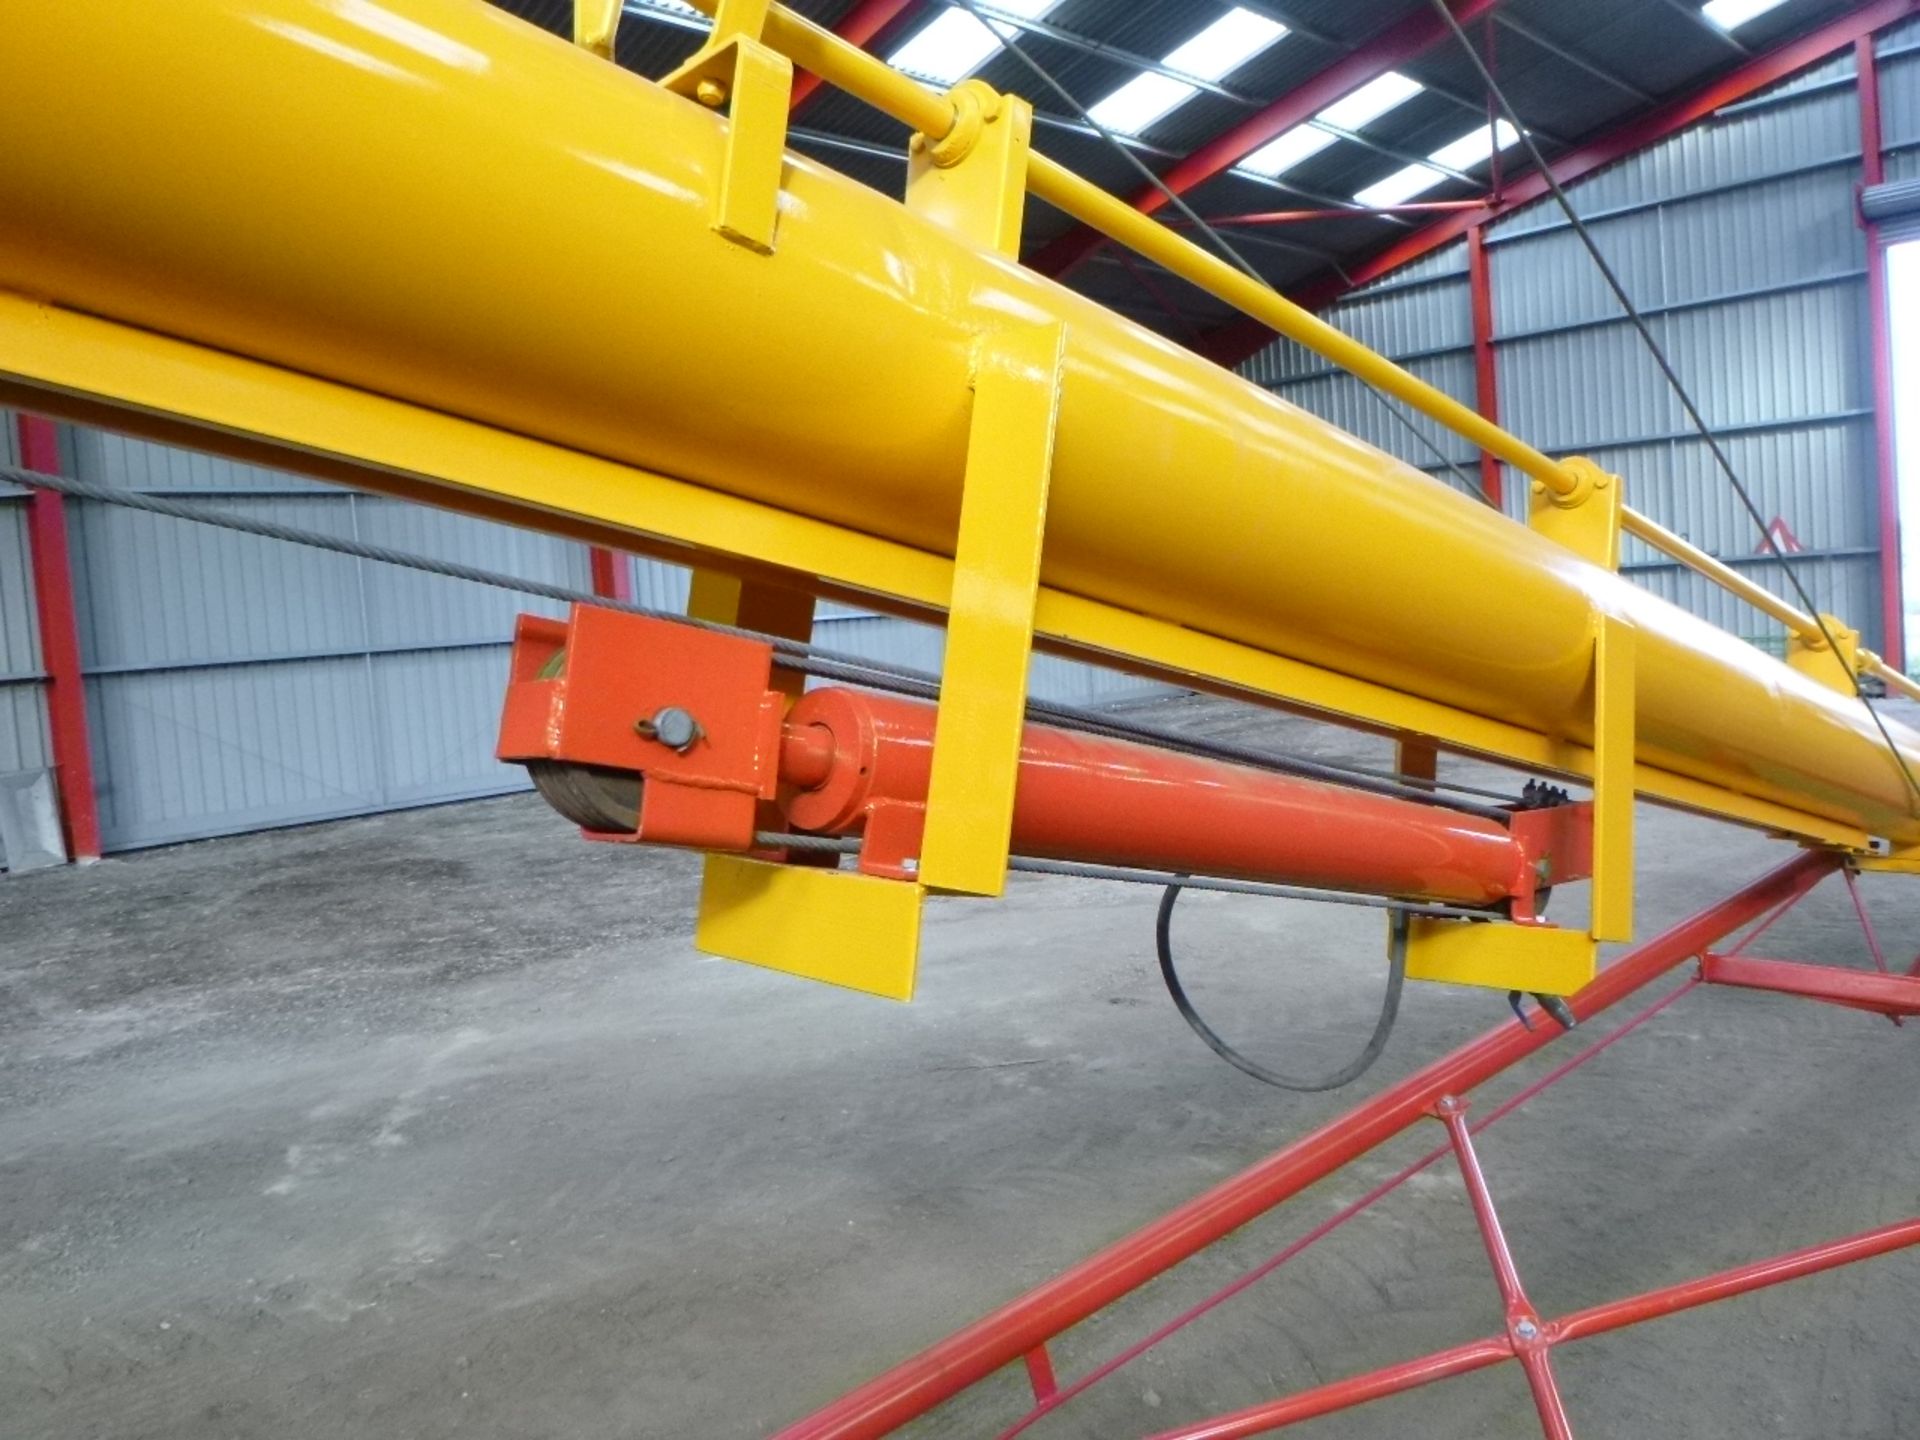 Westfield WR 100-61 Grain Auger, approx. 61'/18.5m long, 10in./250mm dia., capacity up to 120tph, - Image 12 of 18